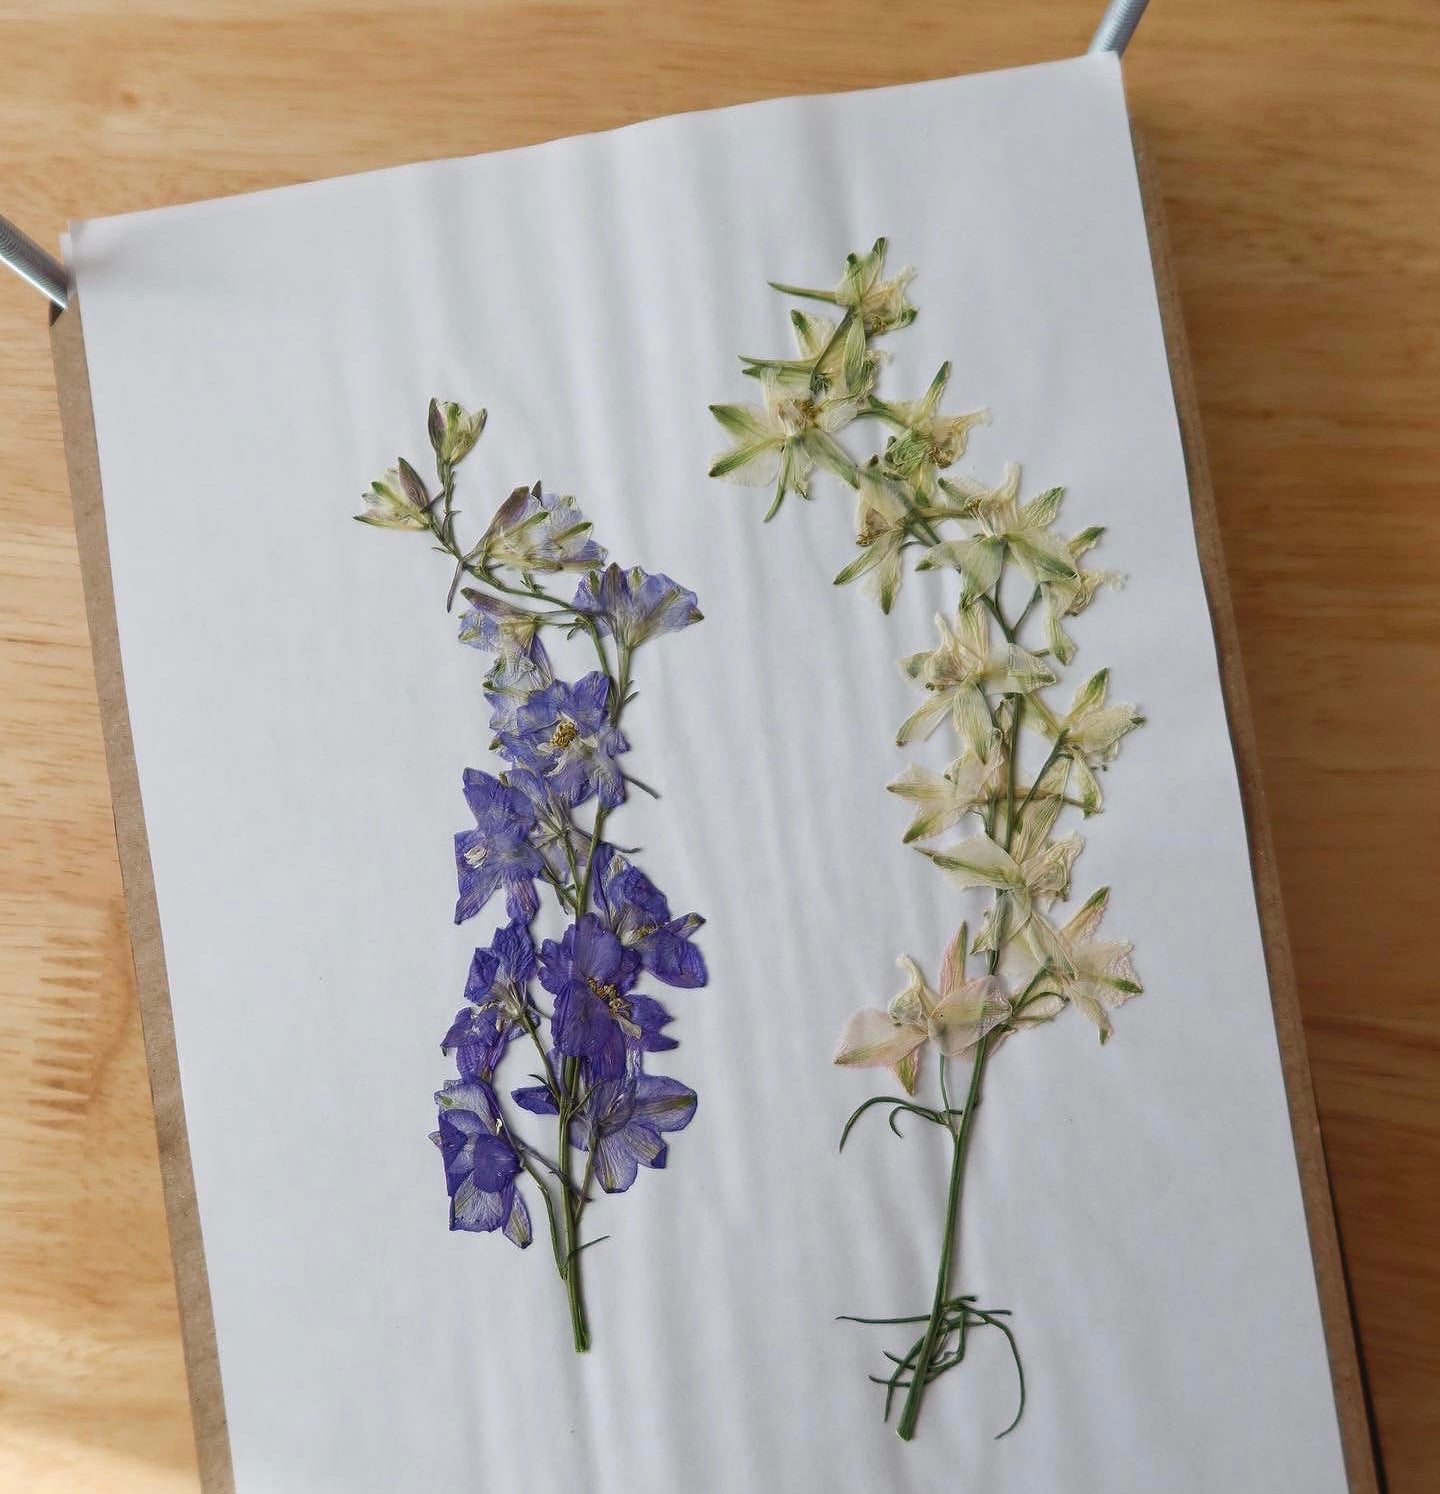 Pressed Flowers – The Glass Workbench